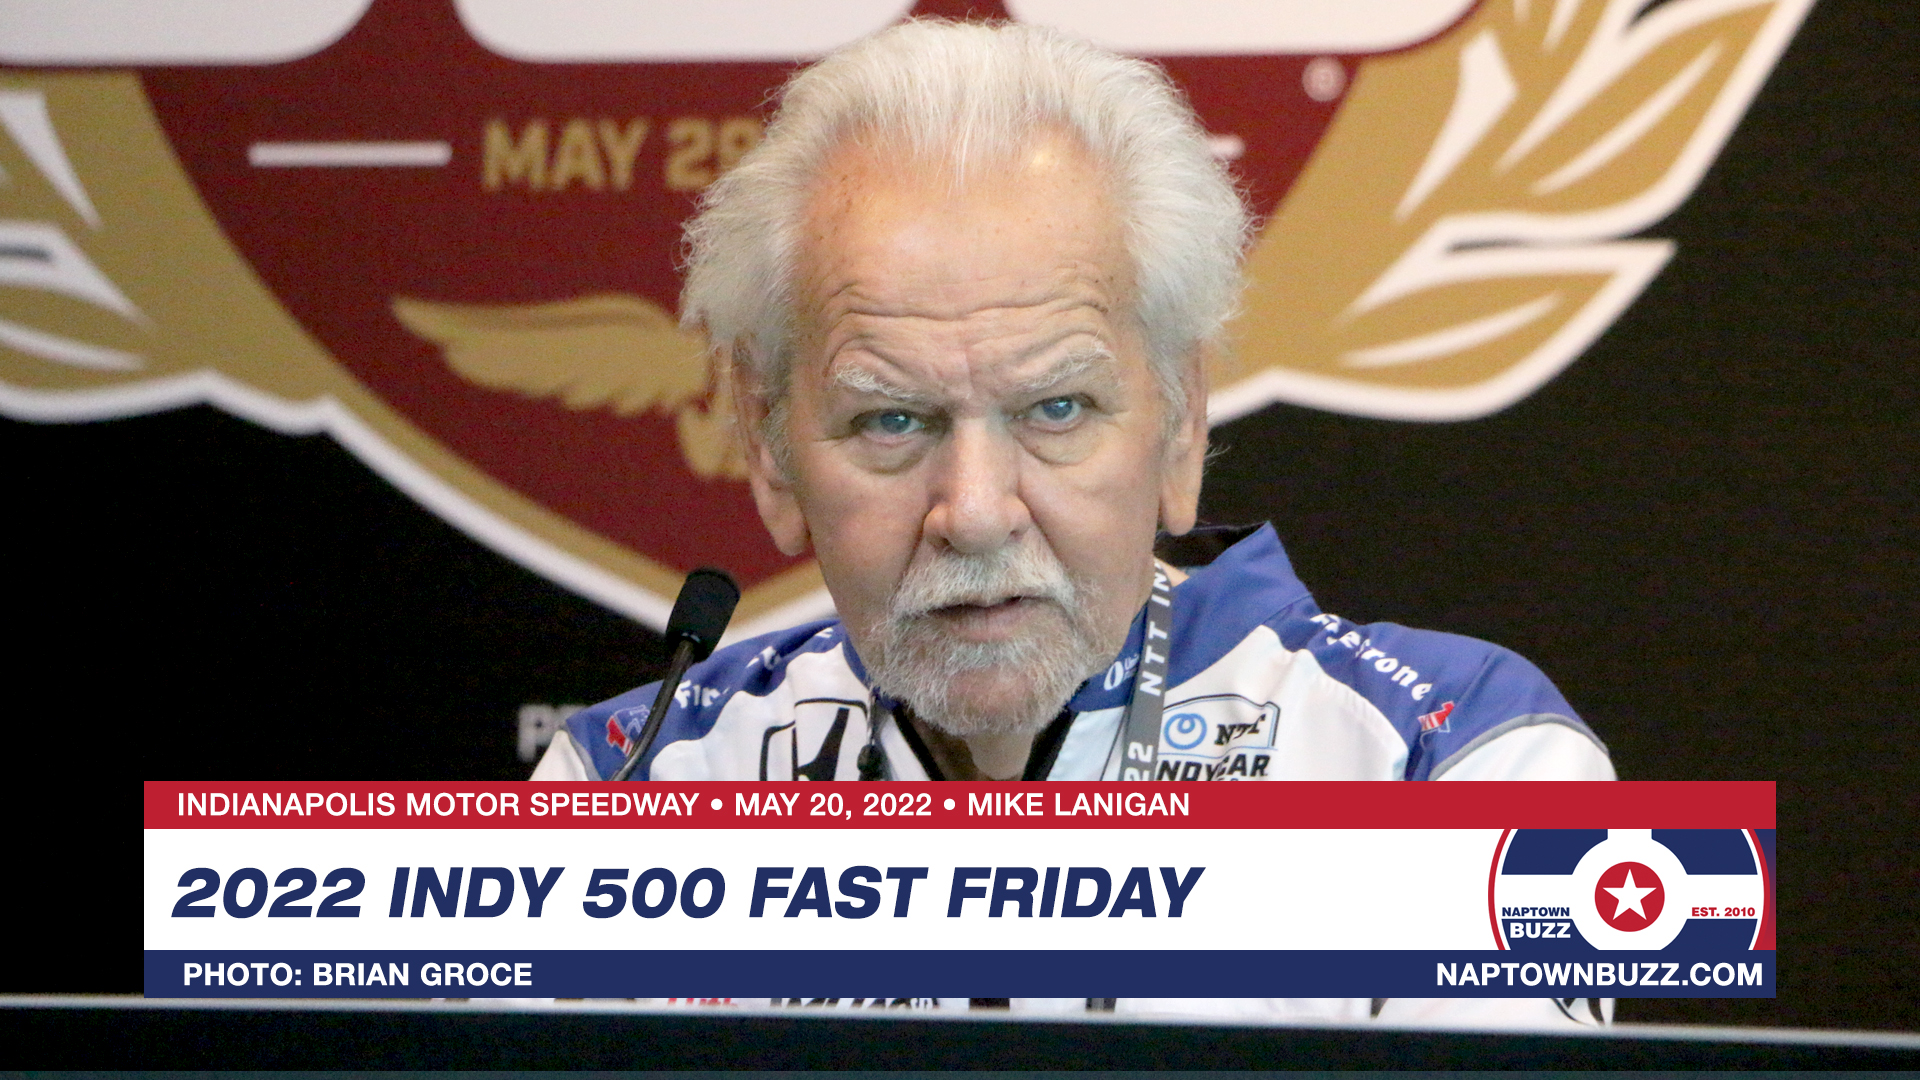 Mike Lanigan on Indy 500 Fast Friday Practice at Indianapolis Motor Speedway on May 20, 2022